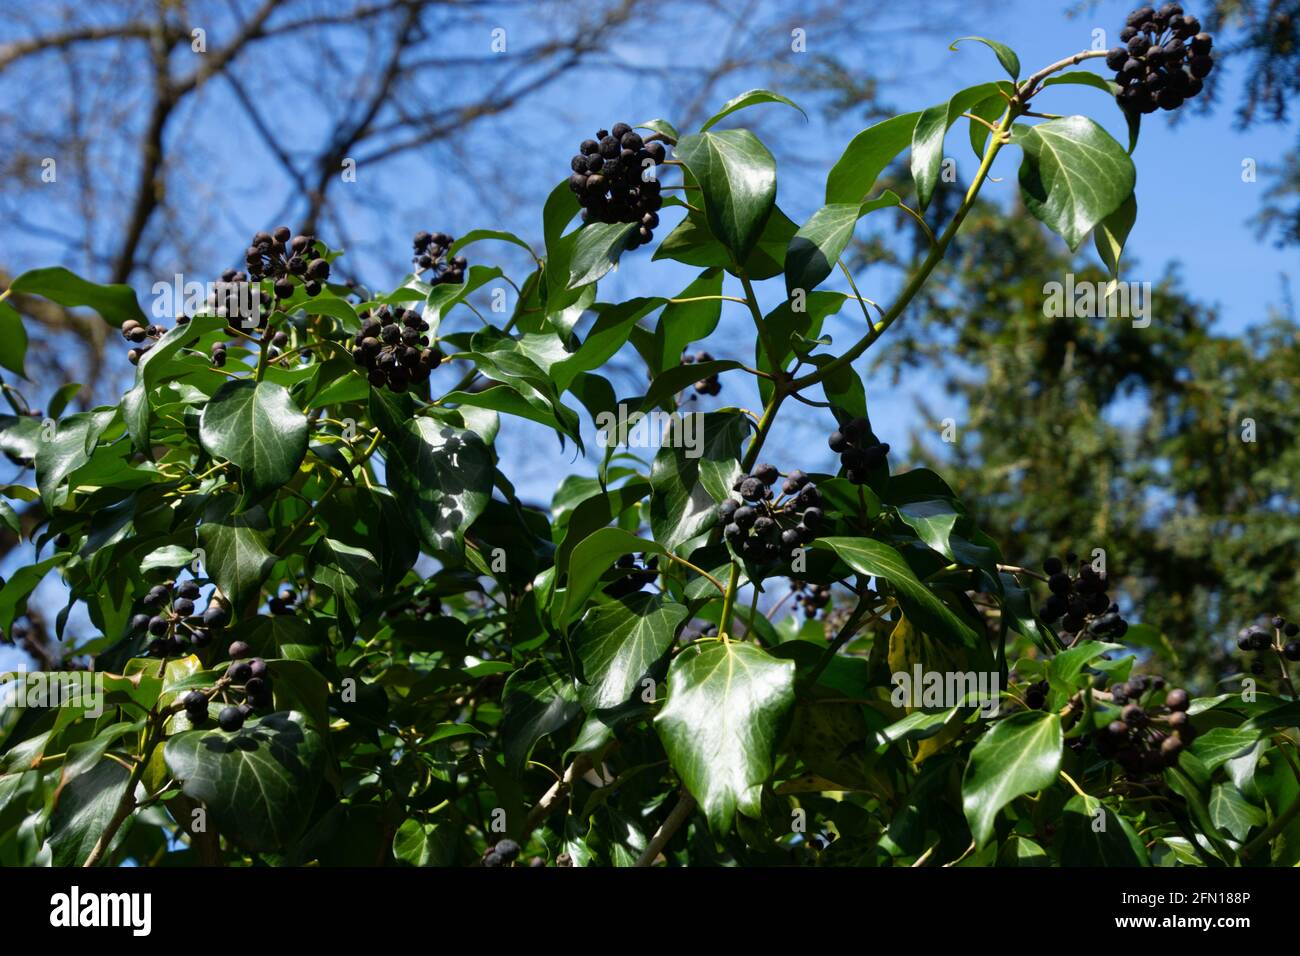 Common ivy hedera bush with many helix berries in the april sun Stock Photo